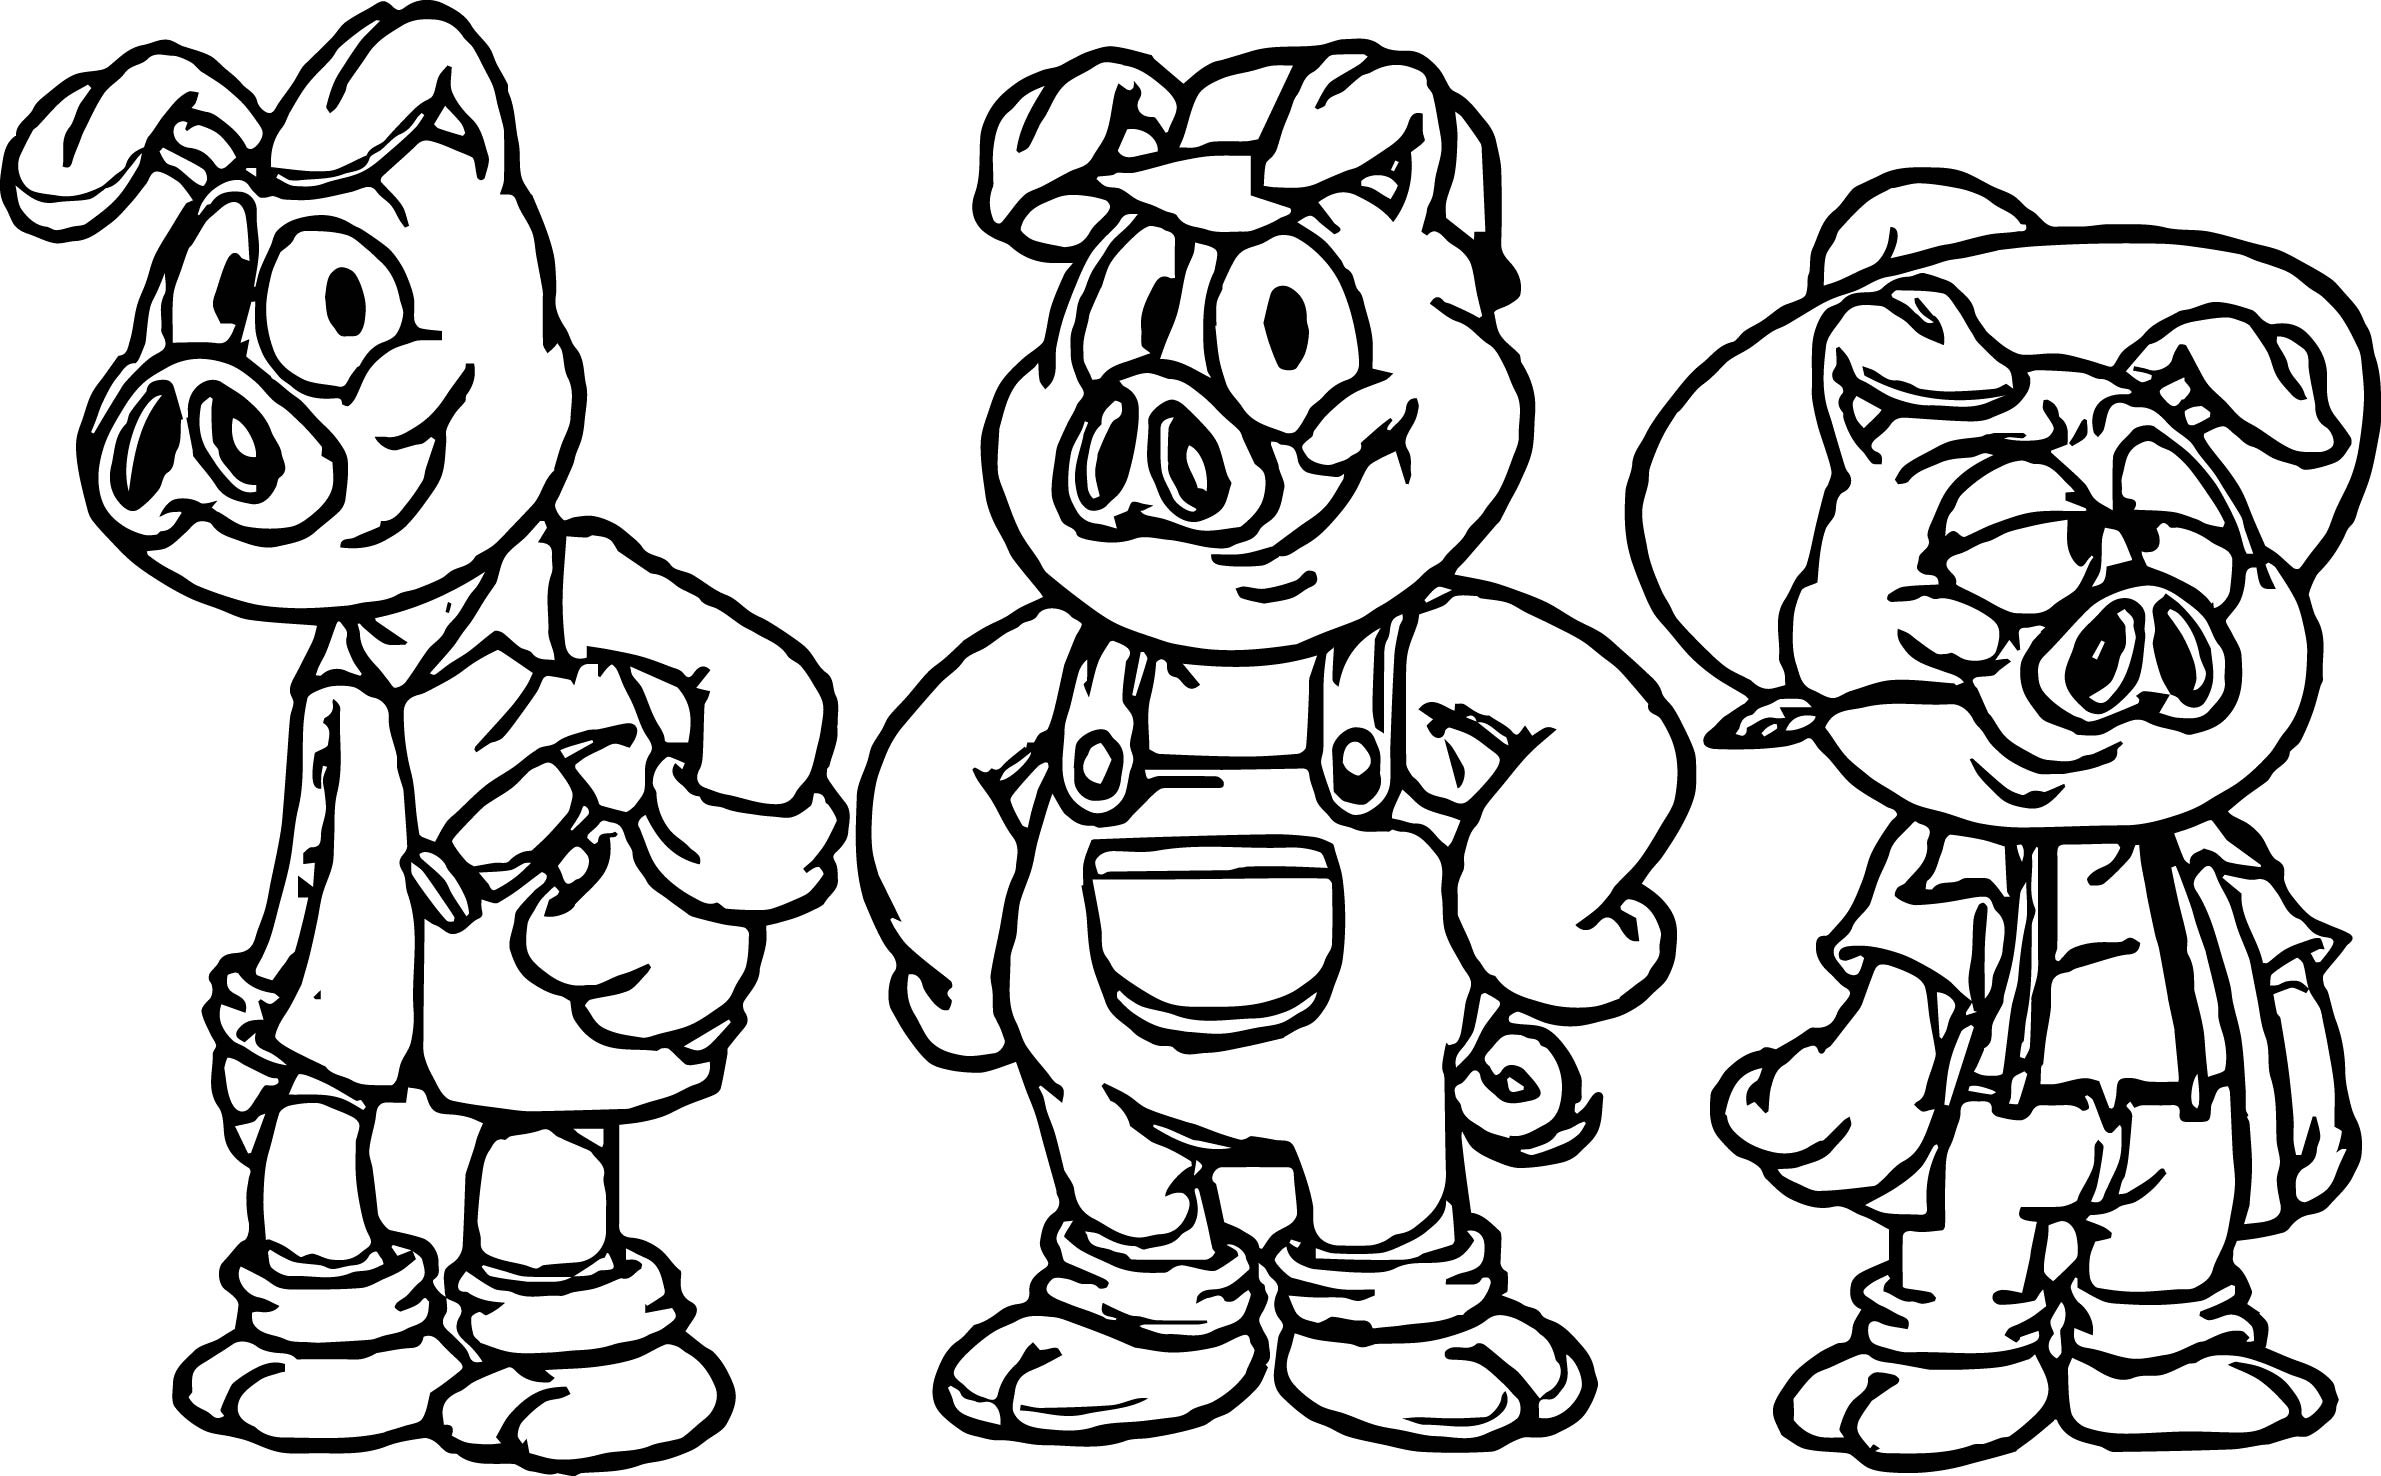 684 Unicorn Coloring Pages Of The Three Little Pigs with Animal character